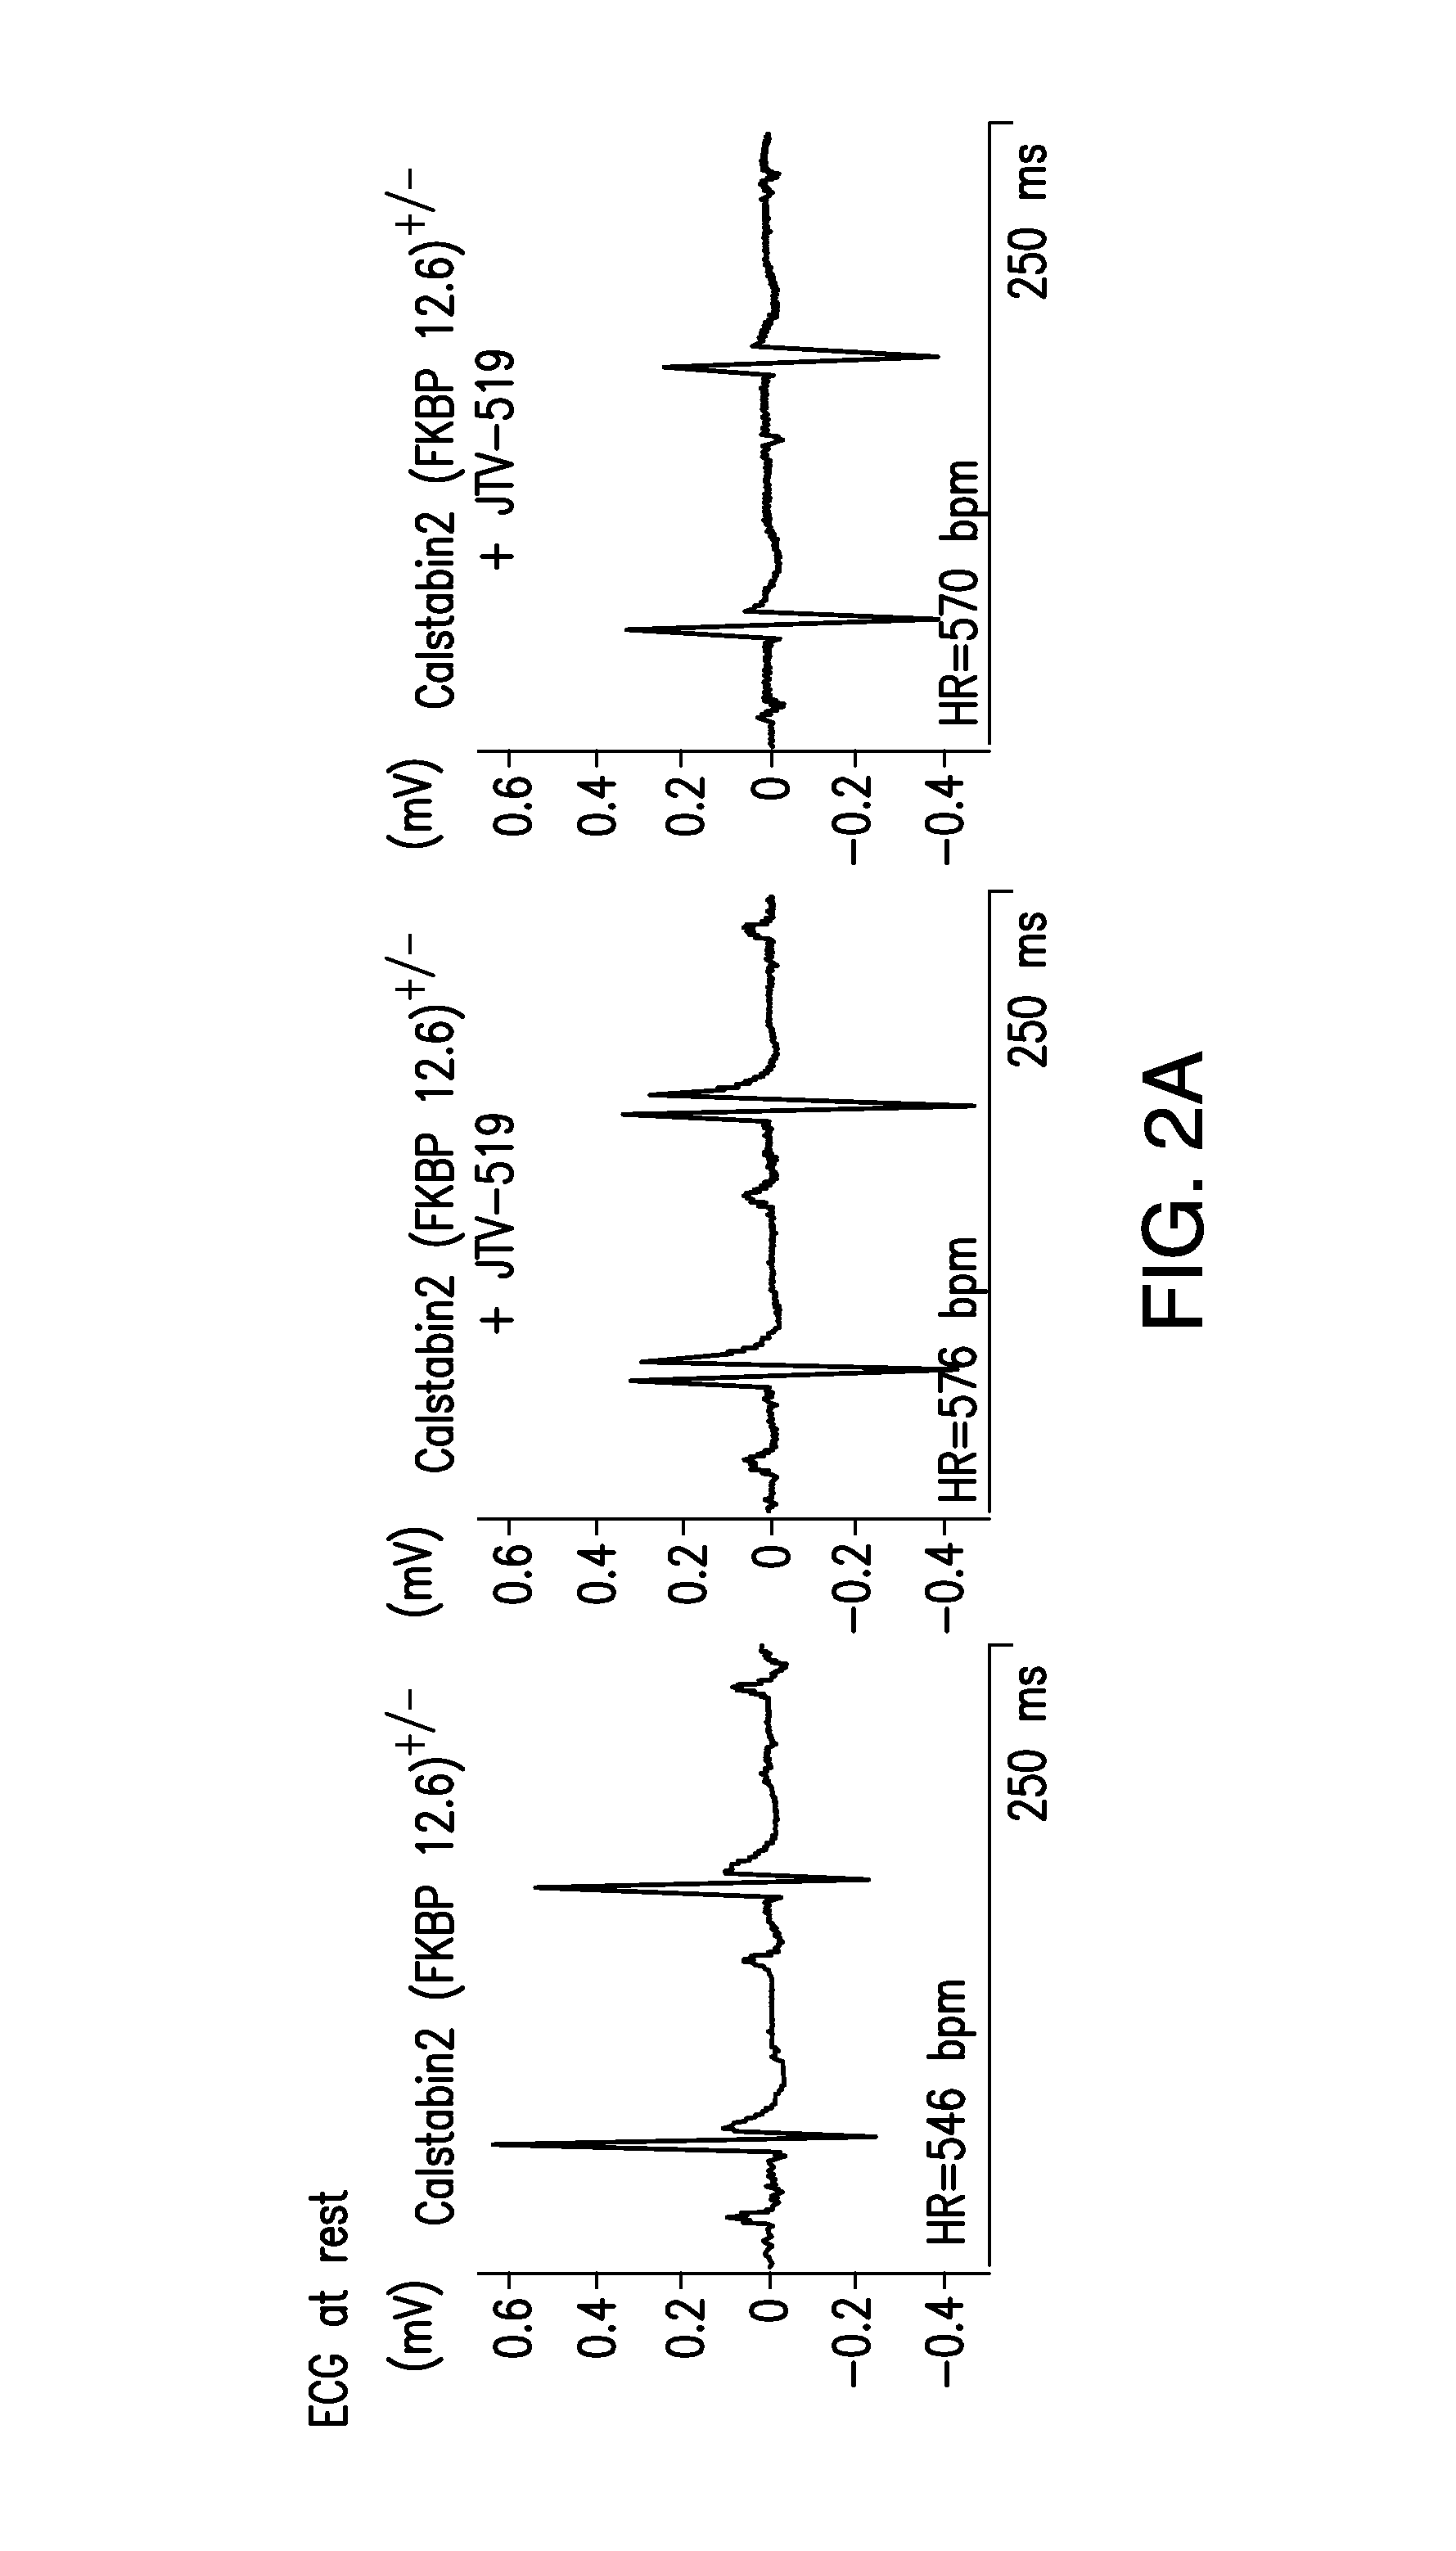 Agents for preventing and treating disorders involving modulation of the ryanodine receptors